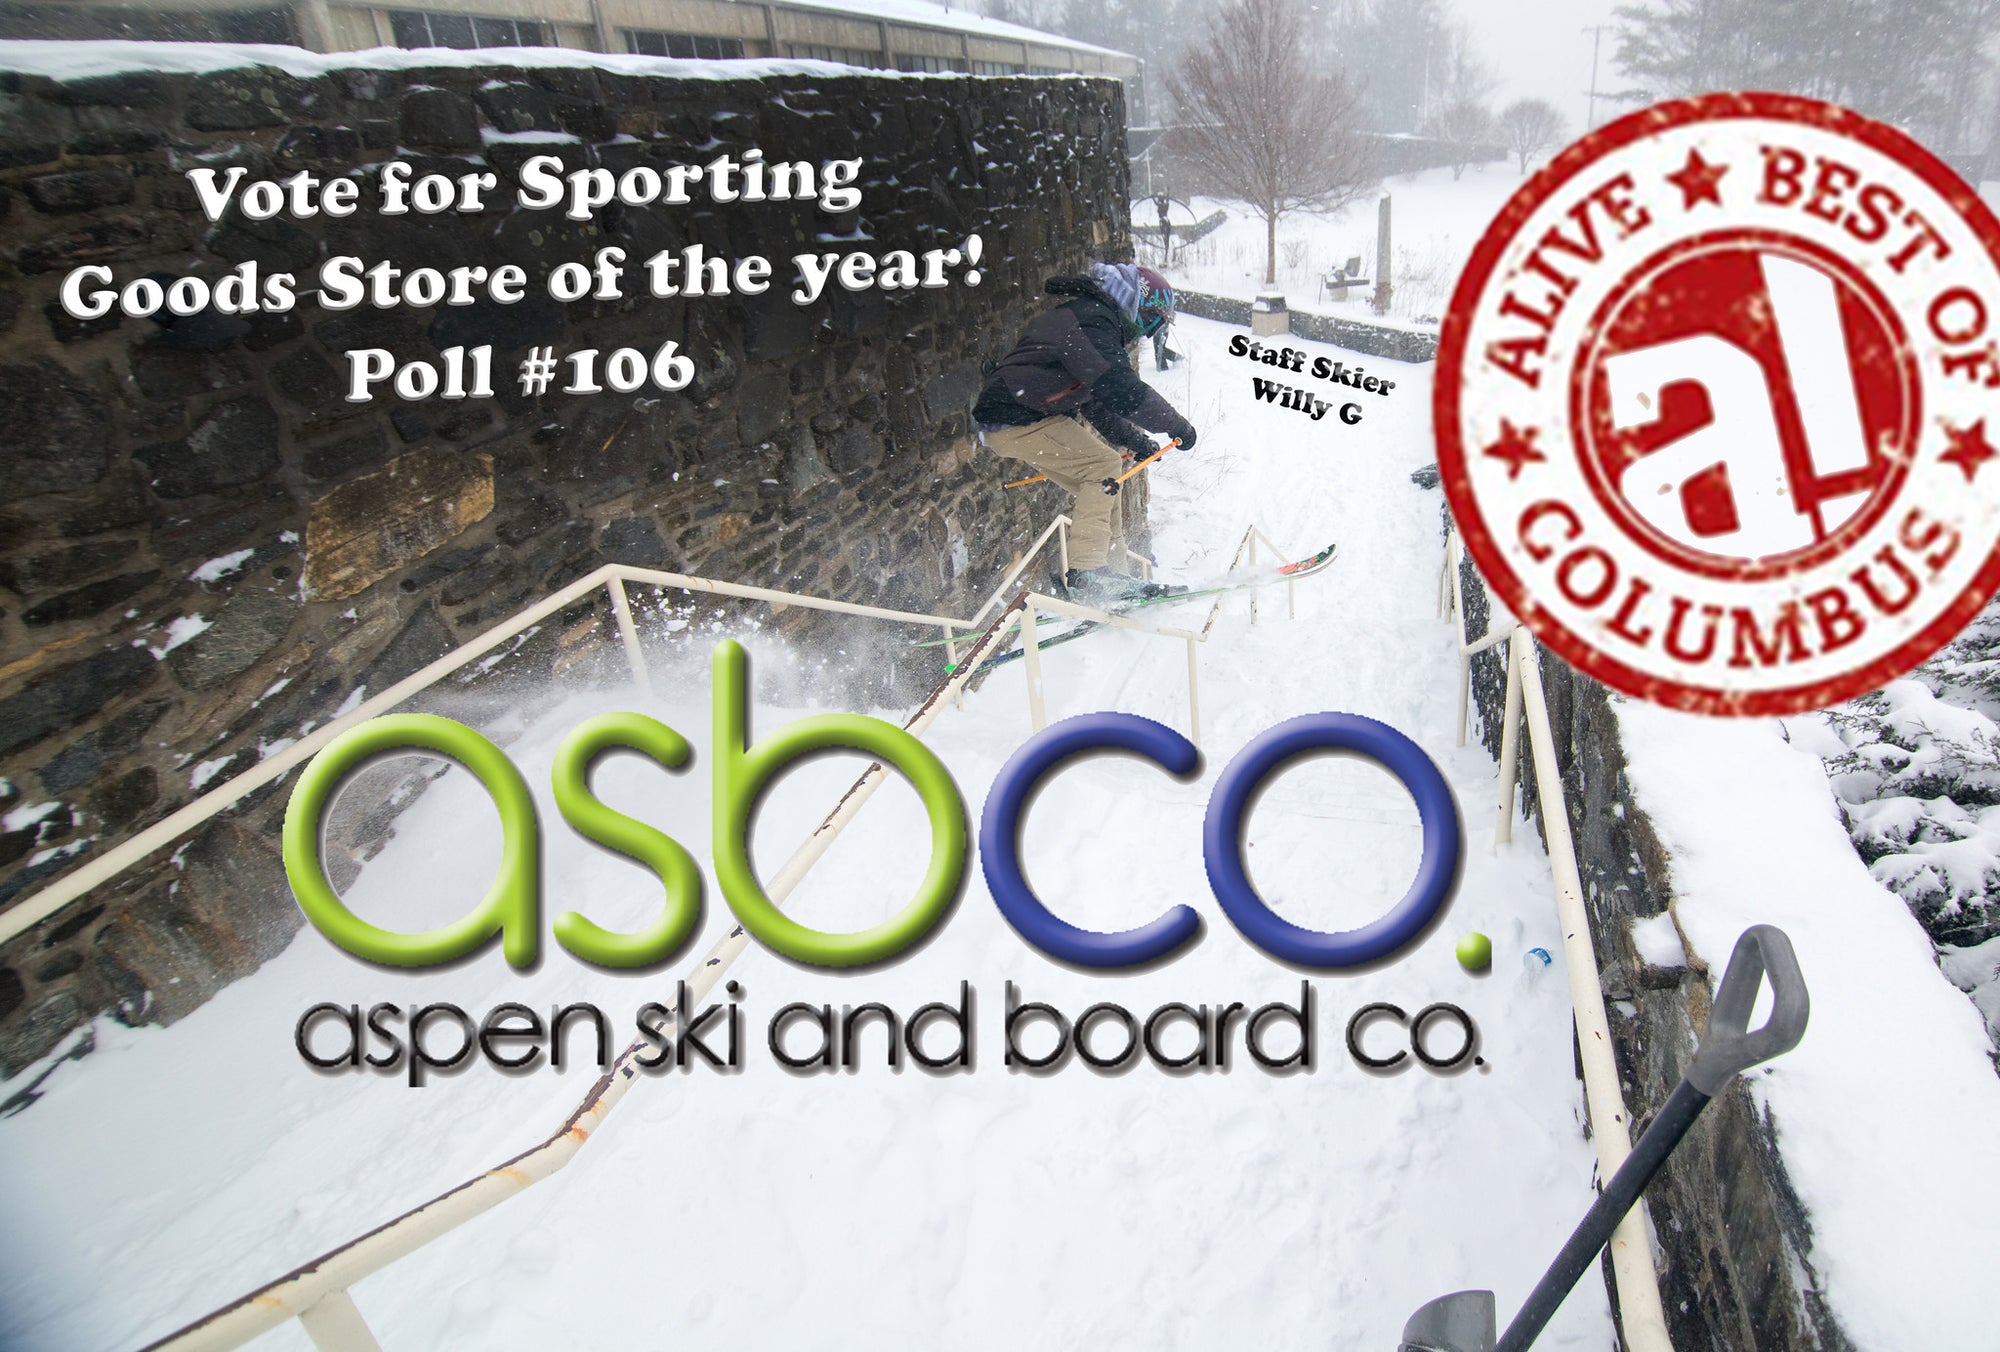 Aspen Ski and Board has been nominated by Columbus Alive for best Sporting Goods Store in Columbus